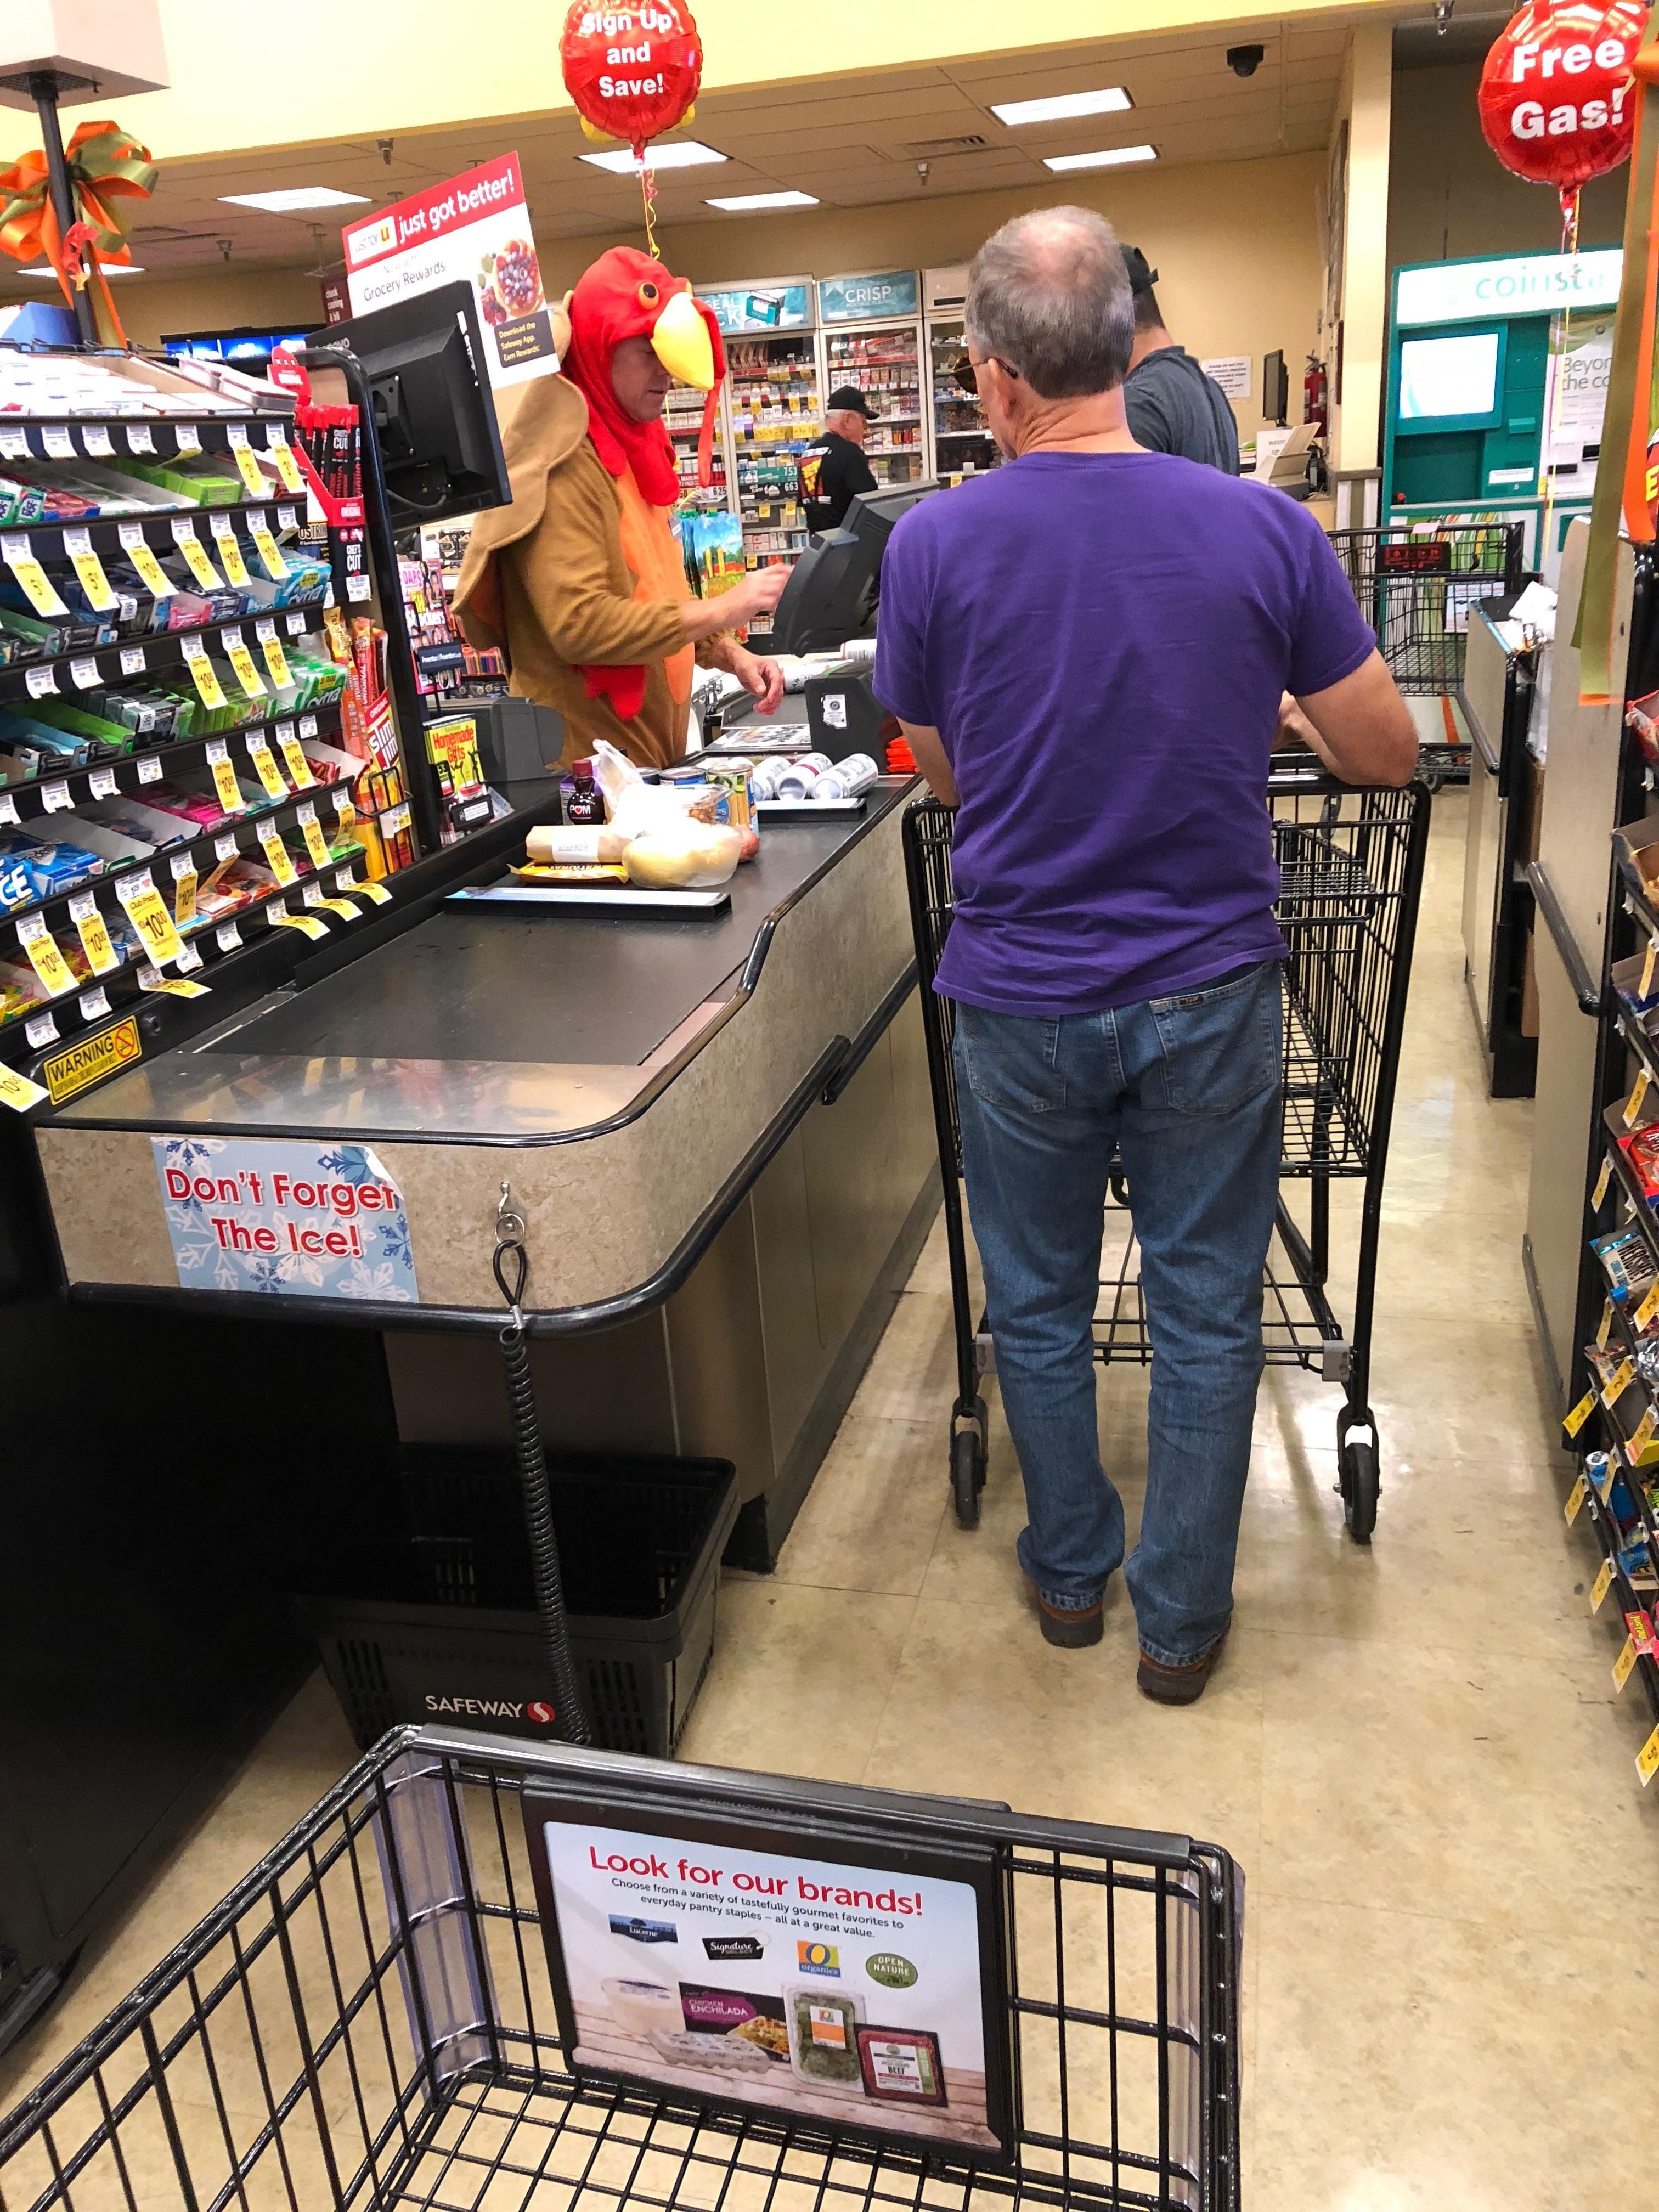 This cashier dressed as a turkey has been gobbling over the intercom every few minutes